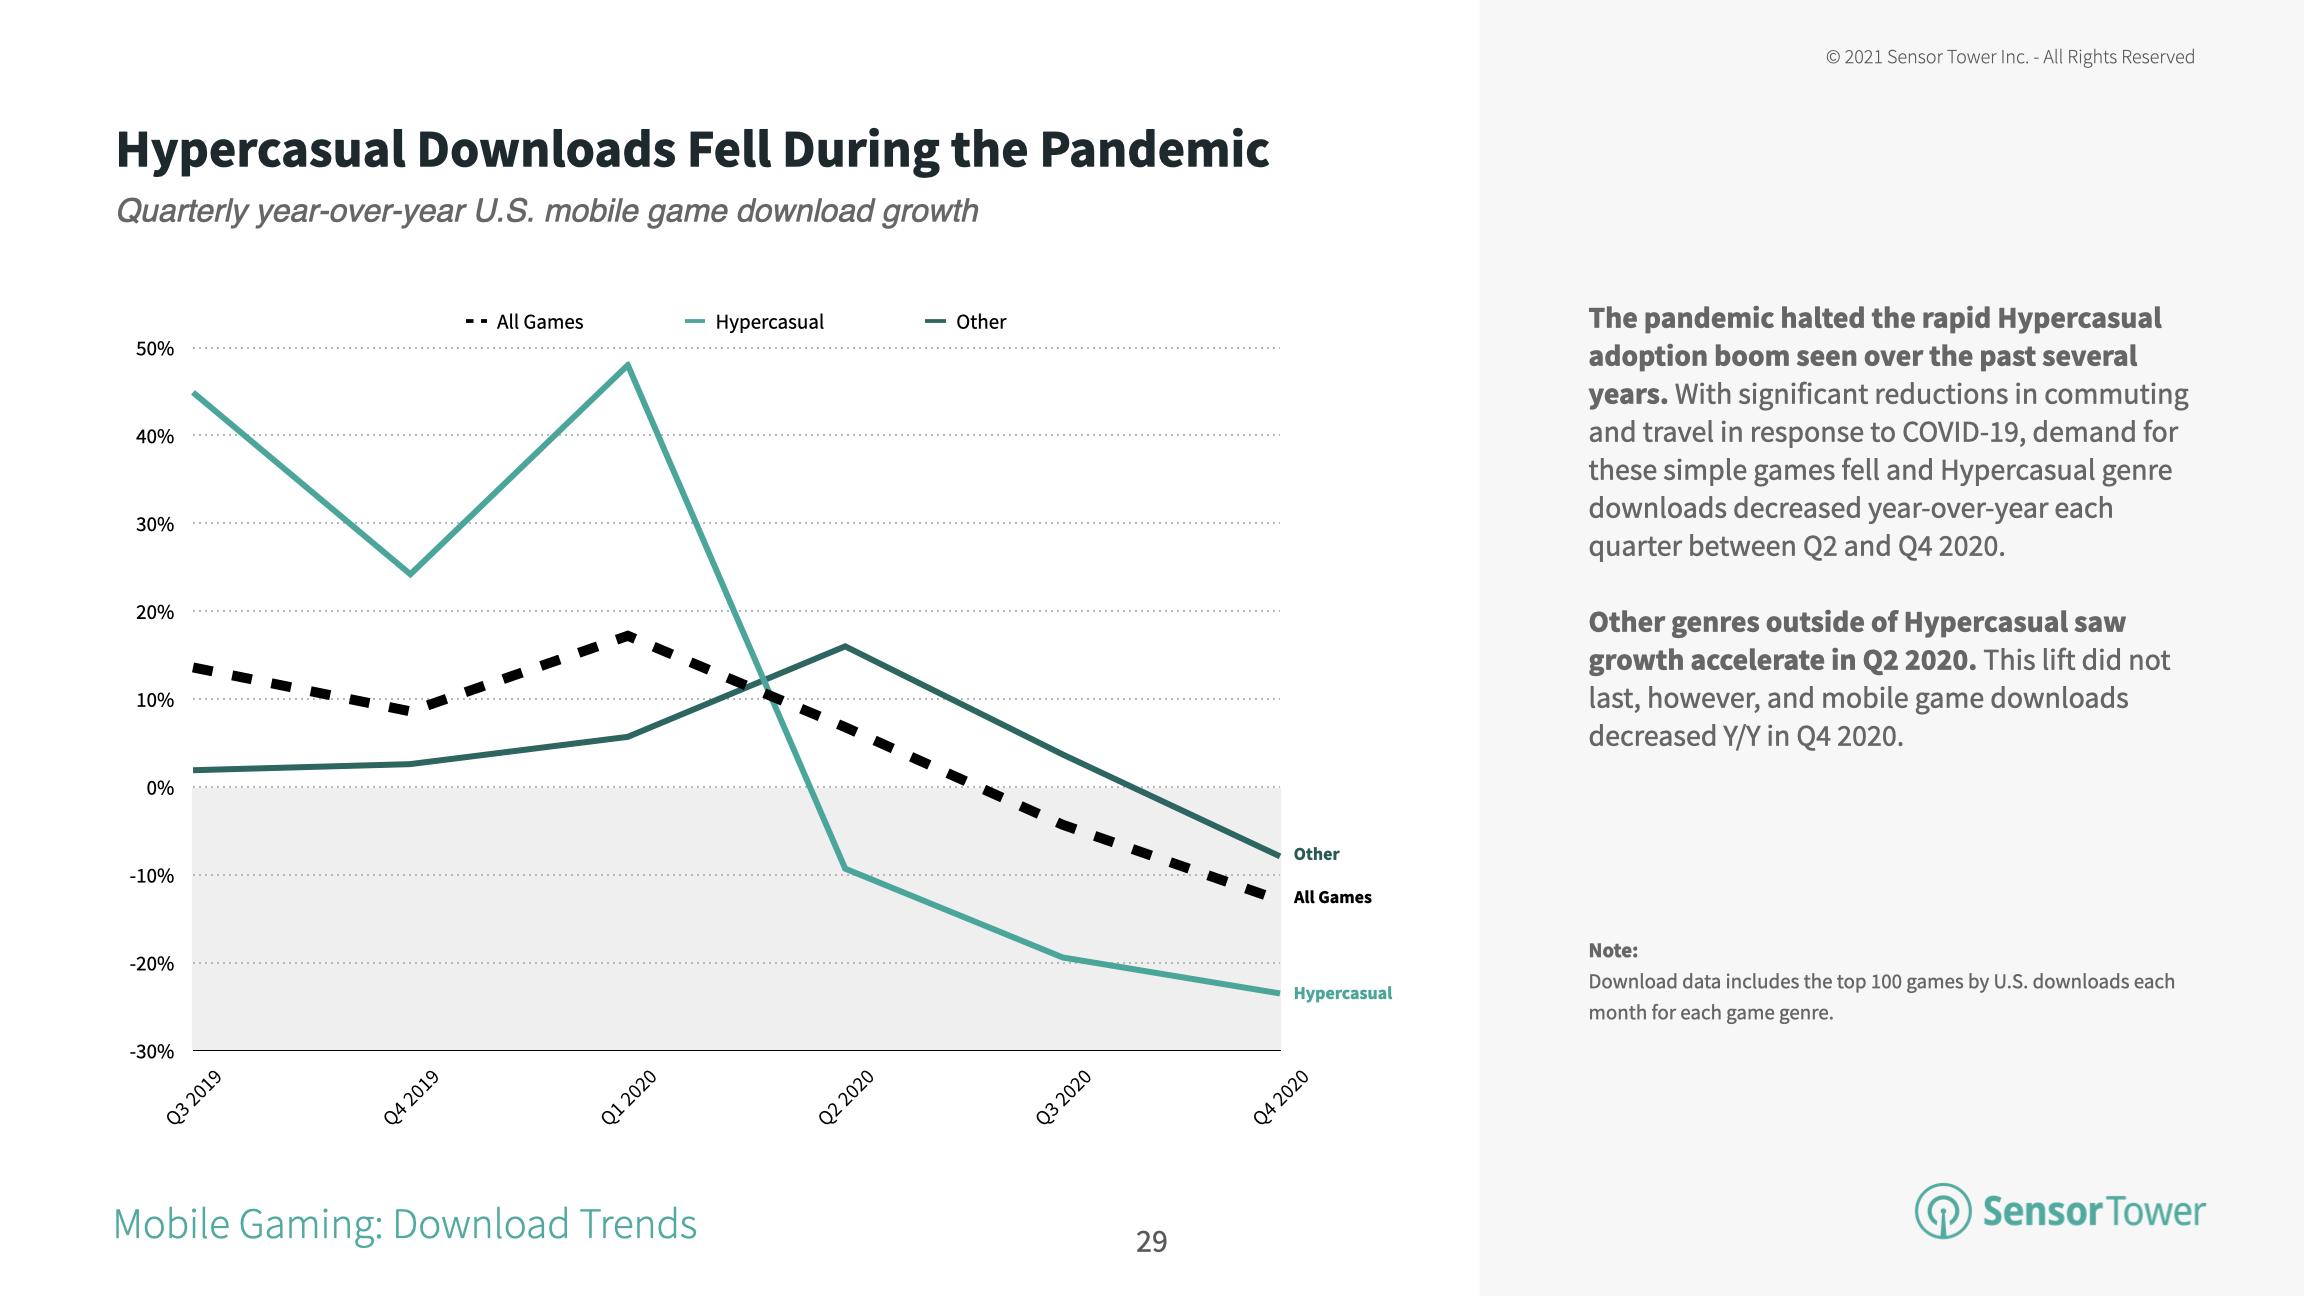 Hypercasual game installs declined as consumers no longer commuted to work due to COVID-19.